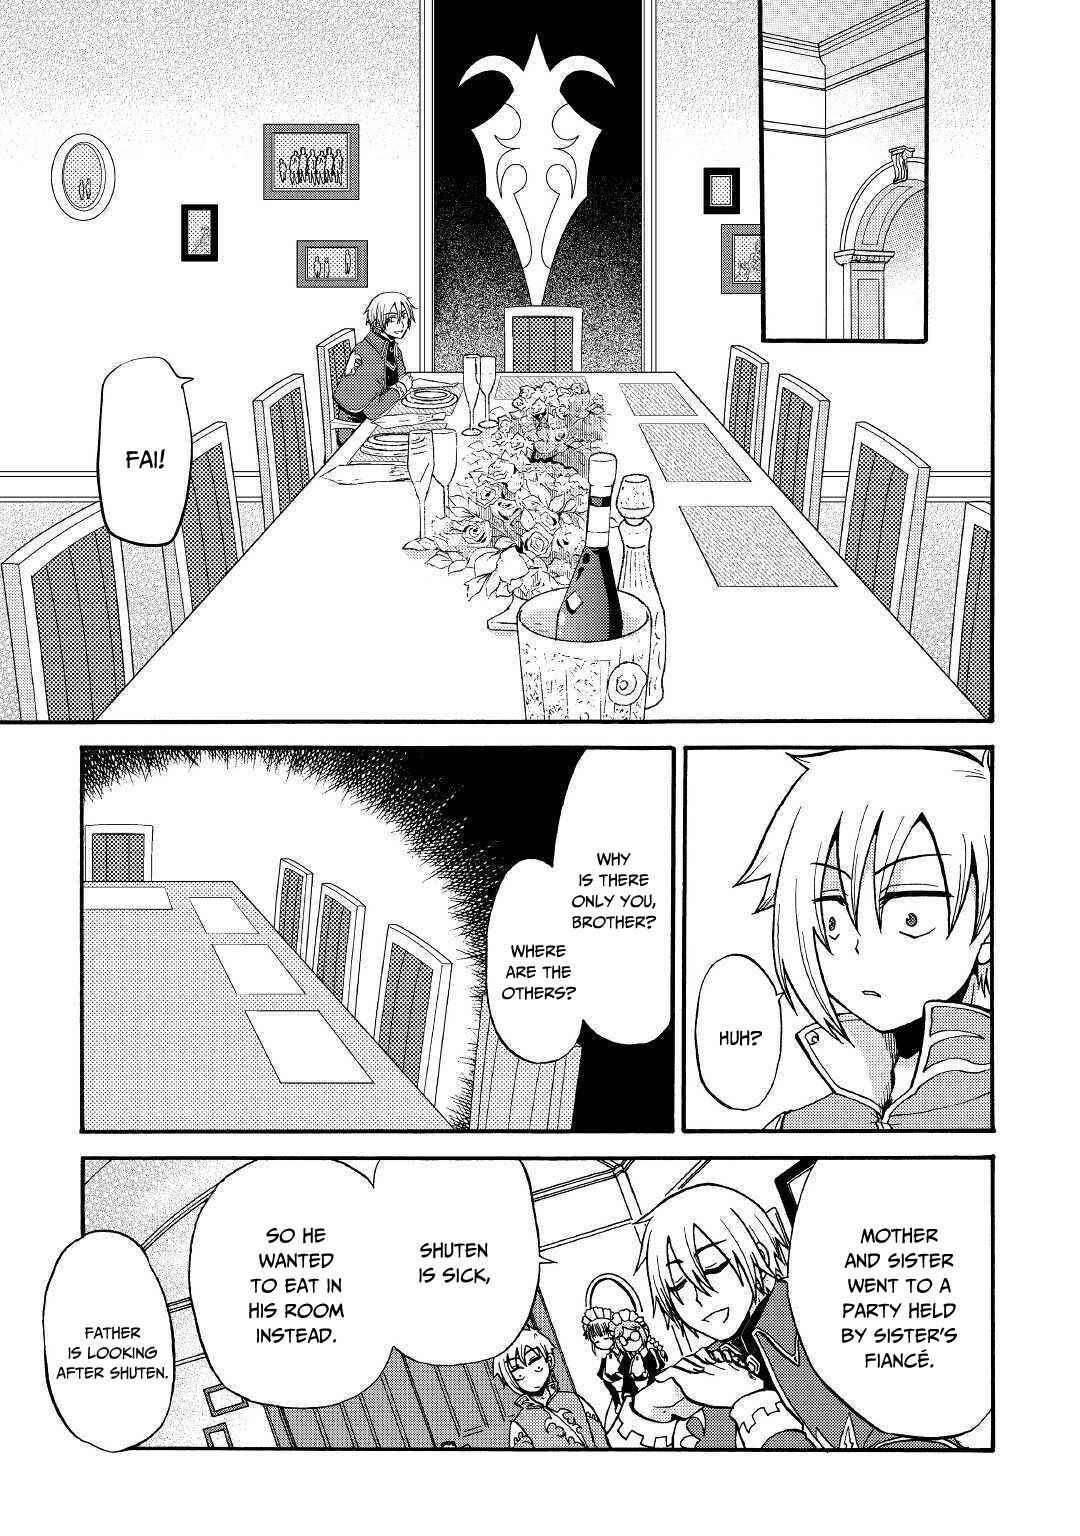 Previous Life Was Sword Emperor. This Life Is Trash Prince. - chapter 9 - #6